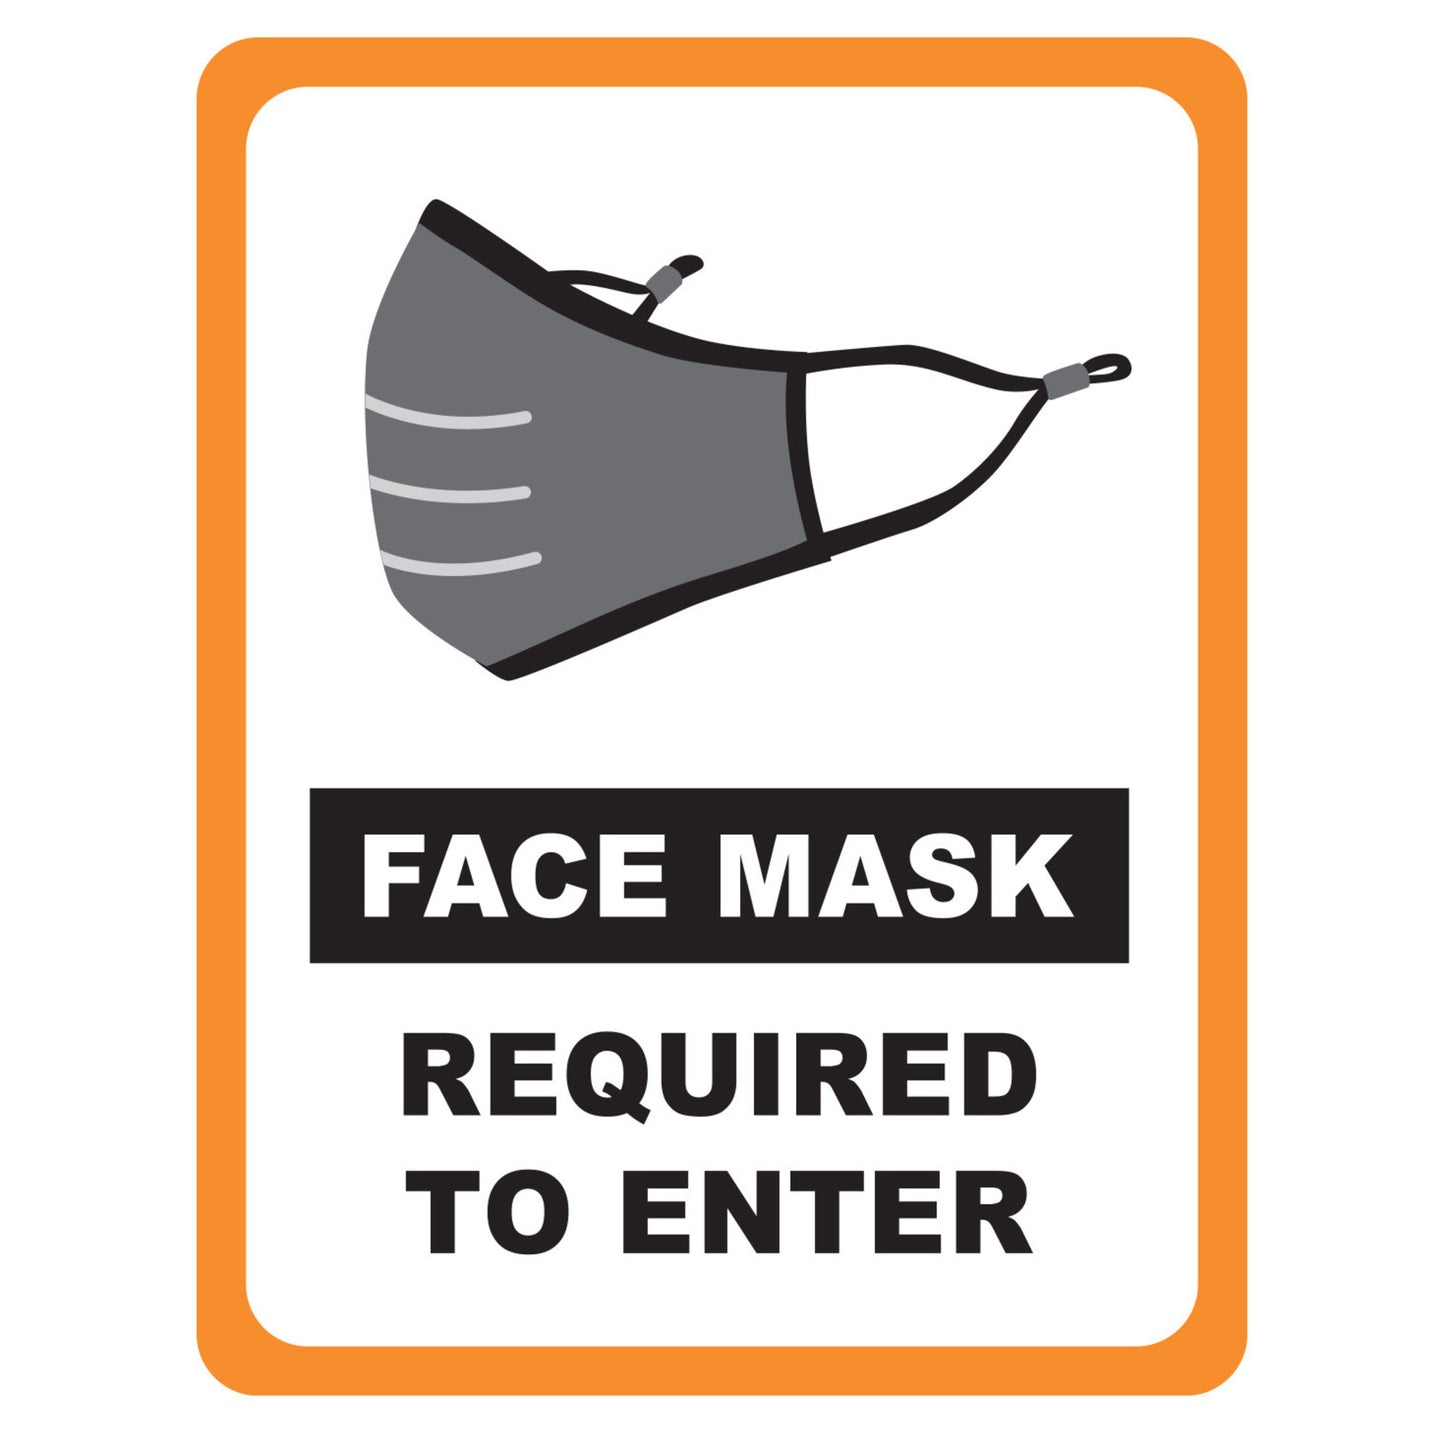 WC-811 - "Face Mask Required" Window Cling, 8-1/2 x 11, 2 pcs/pk